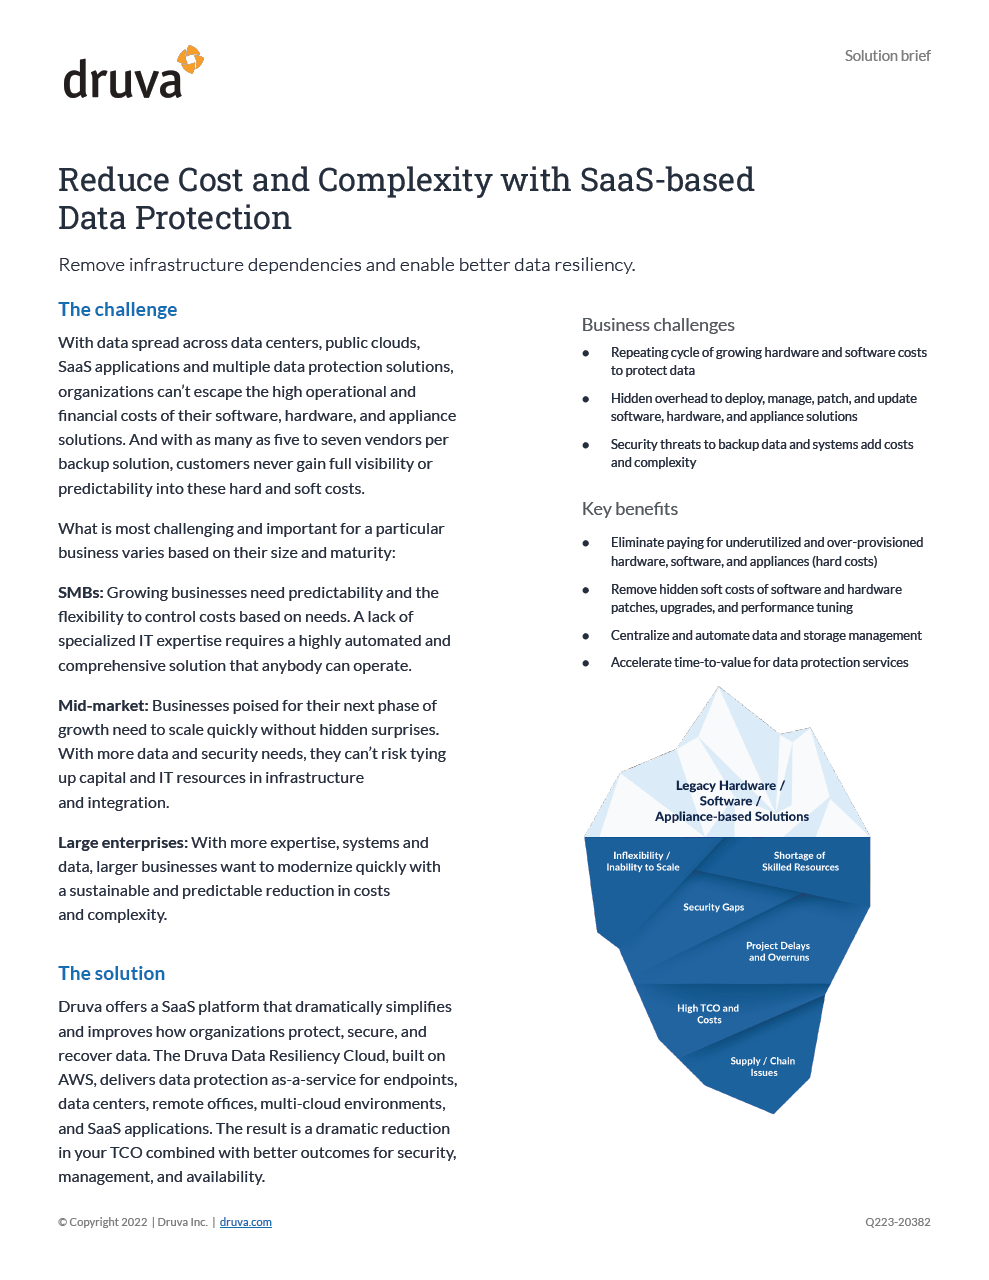 Reduce Cost and Complexity with SaaS-based Data Protection